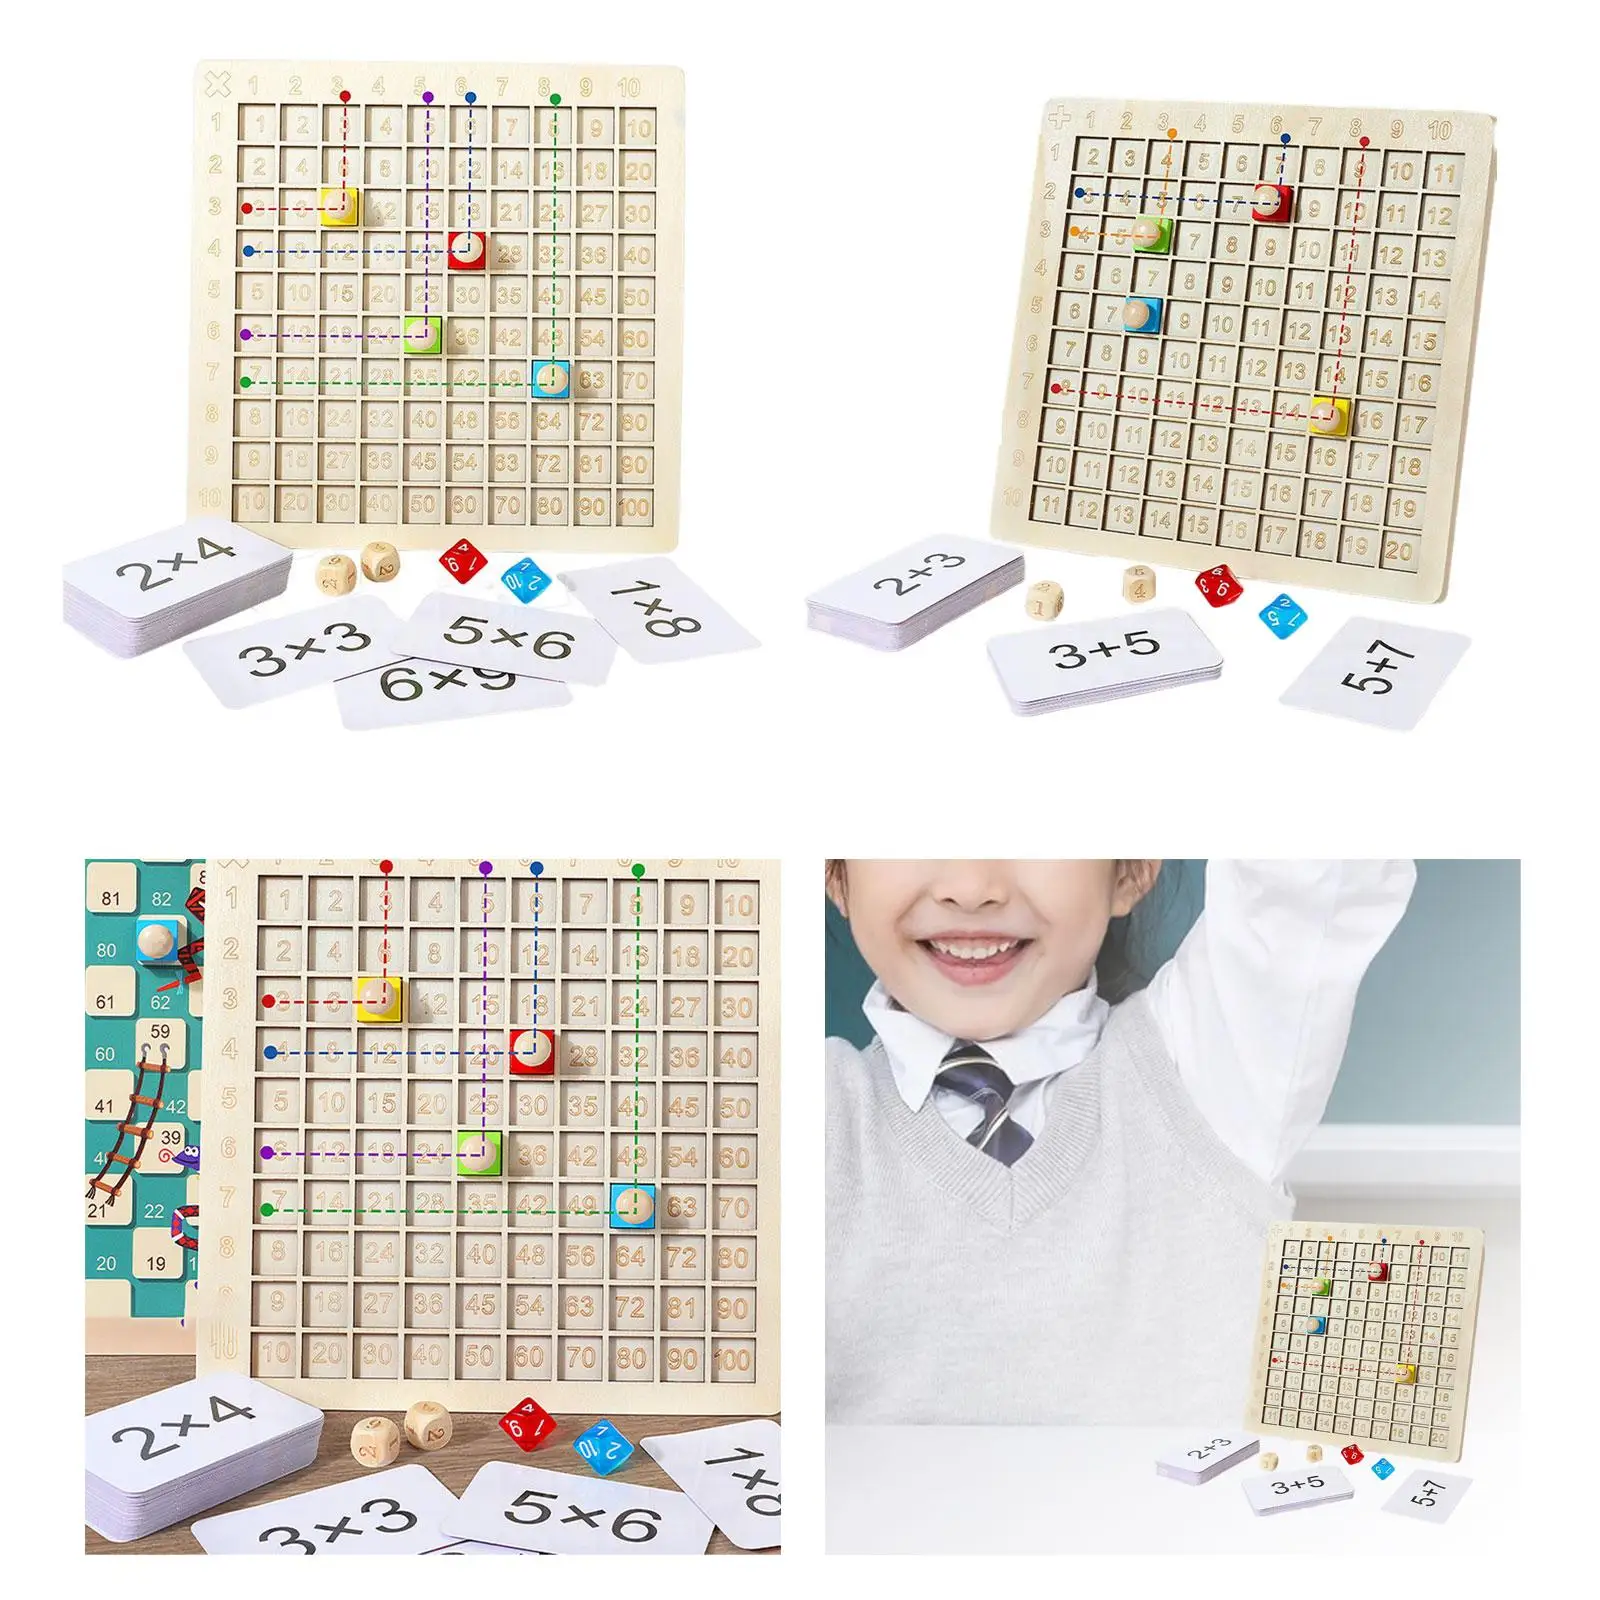 Wood Table Math Board Game Preschool Puzzle Arithmetic Teaching Aids Counting Toy Educational Learning Toys for Children